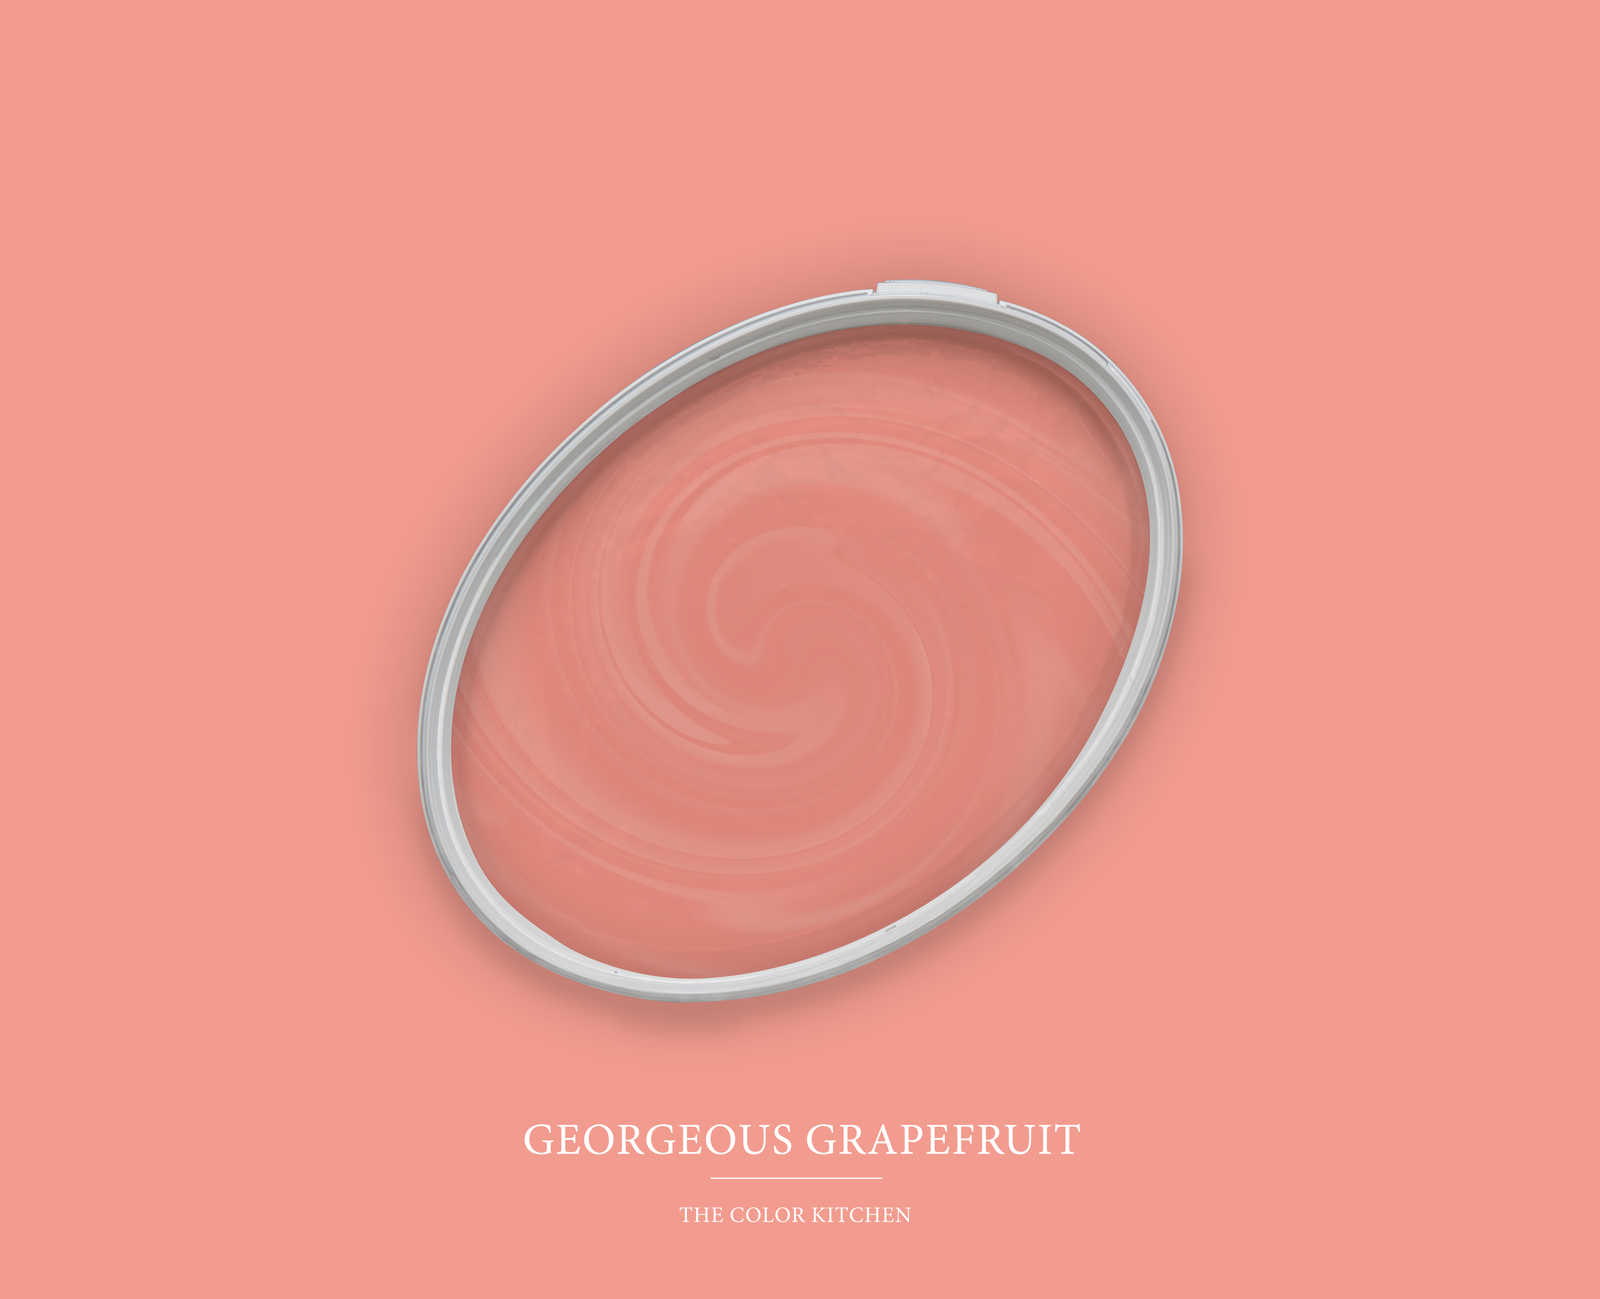 Wall Paint TCK7004 »Georgeous Grapefruit« in bright coral – 5.0 litre
